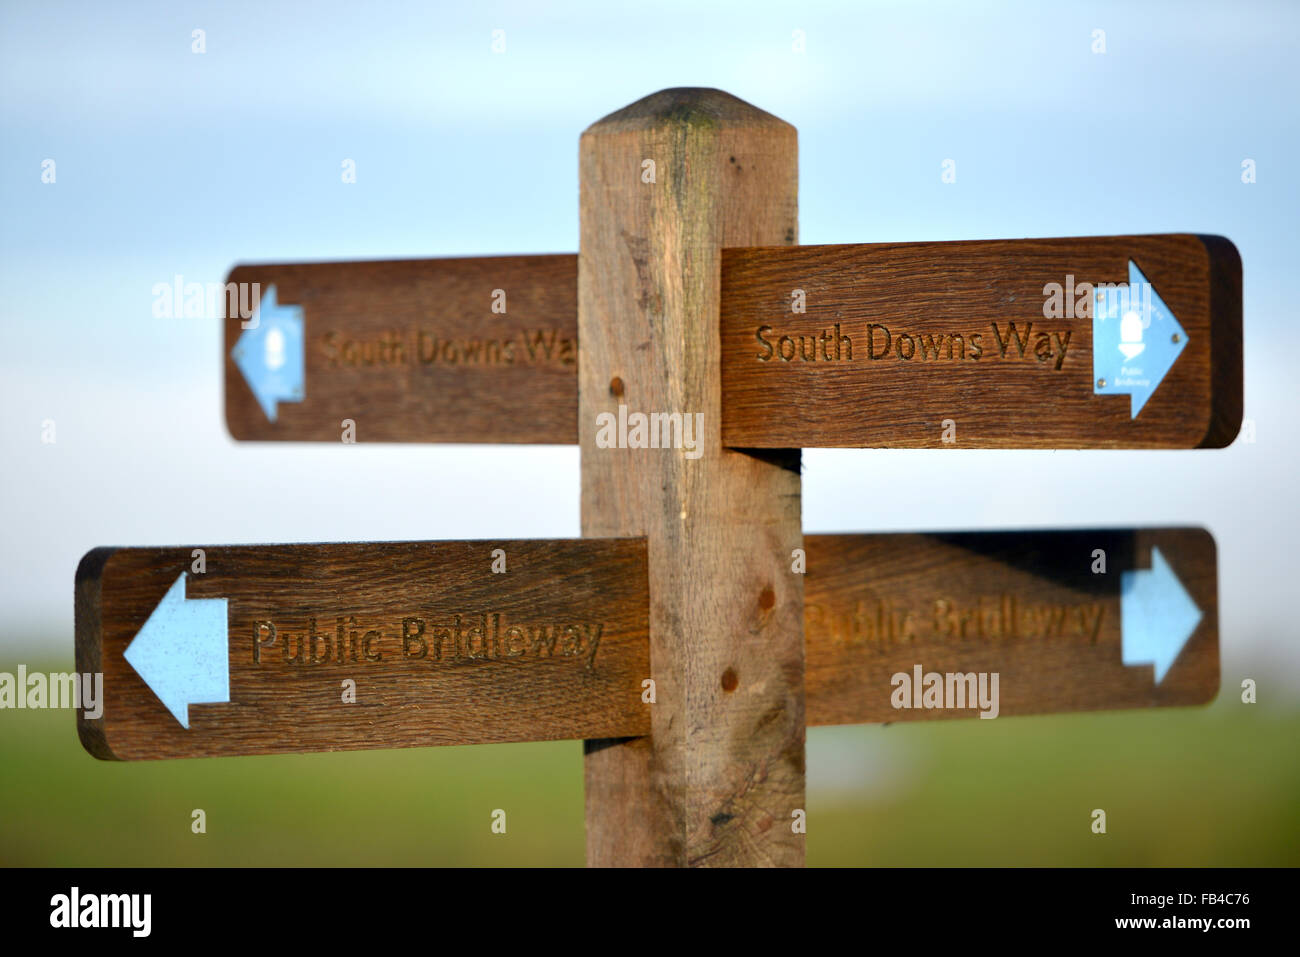 South Downs anmelden Way, UK Stockfoto